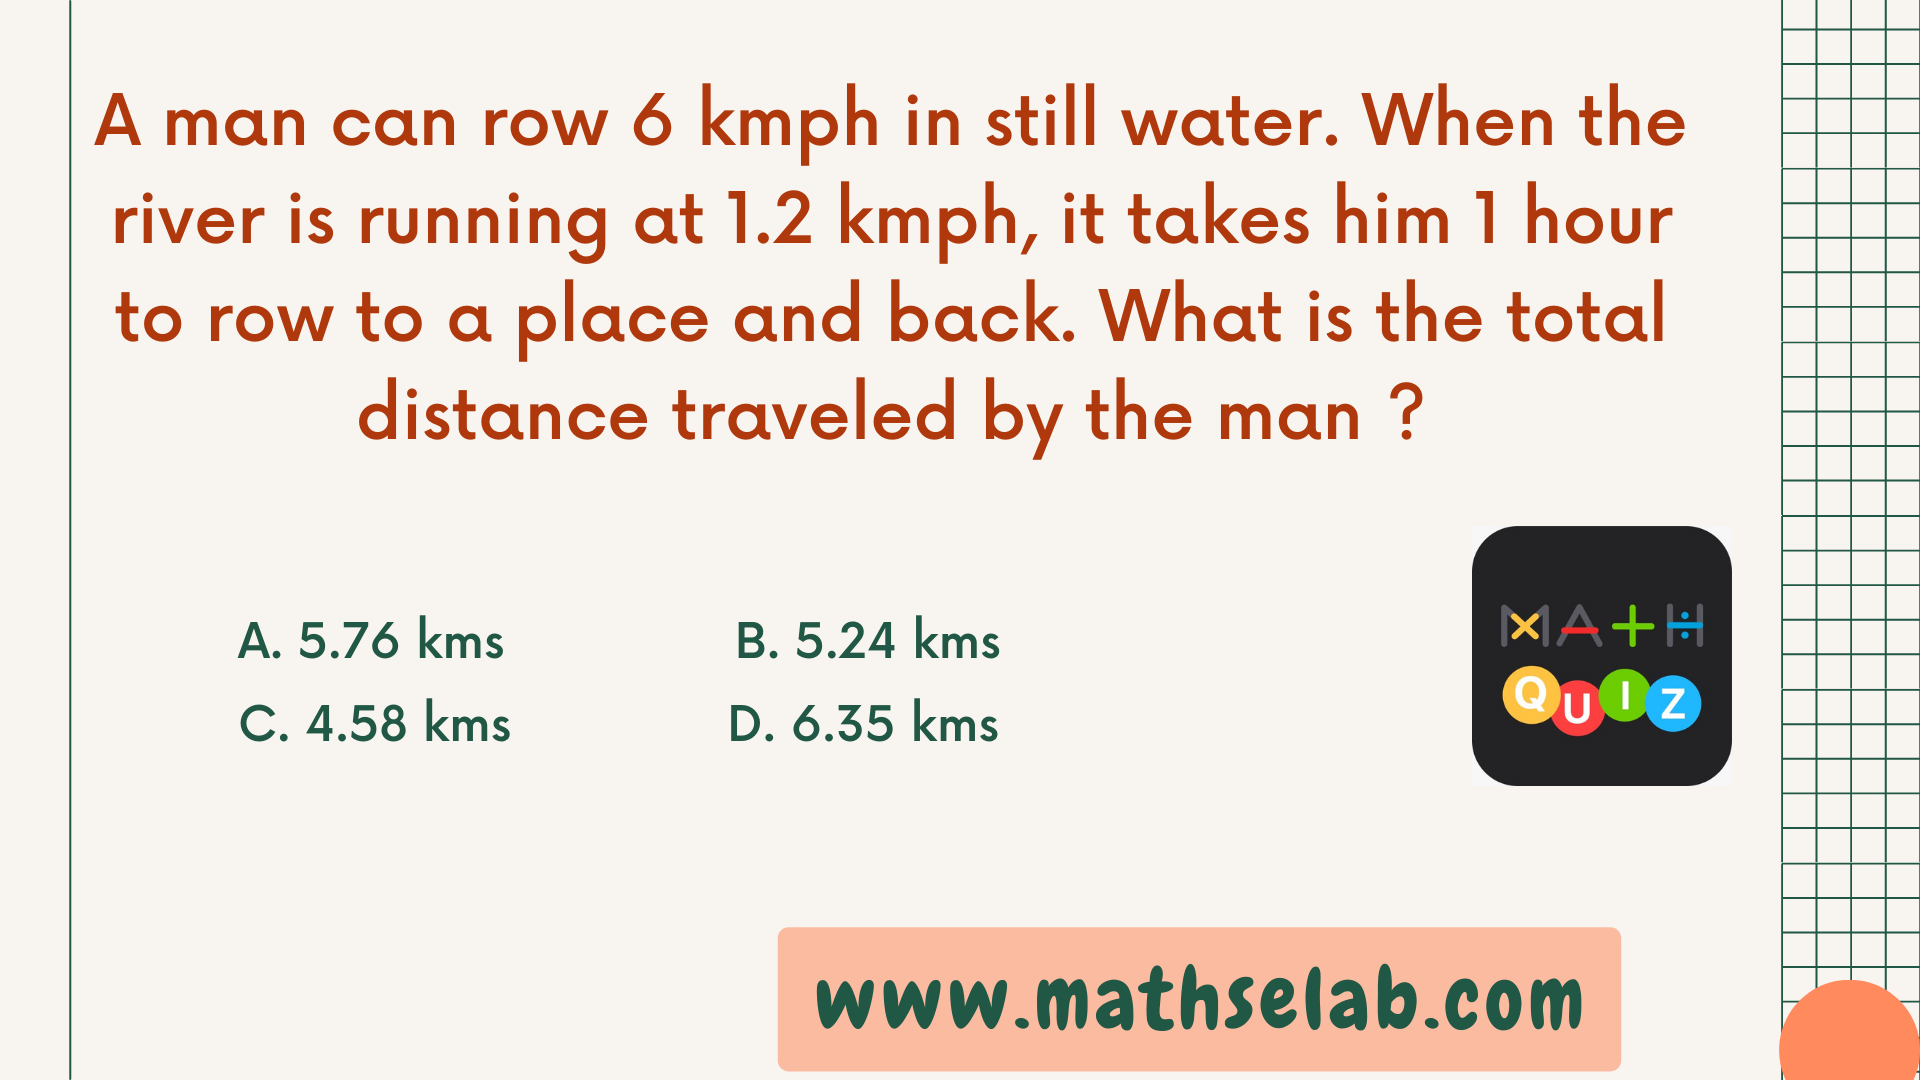 A man can row 6 kmph in still water. When the river is running at 1.2 kmph, it takes him 1 hour to row to a place and back. What is the total distance traveled by the man - www.mathselab.com